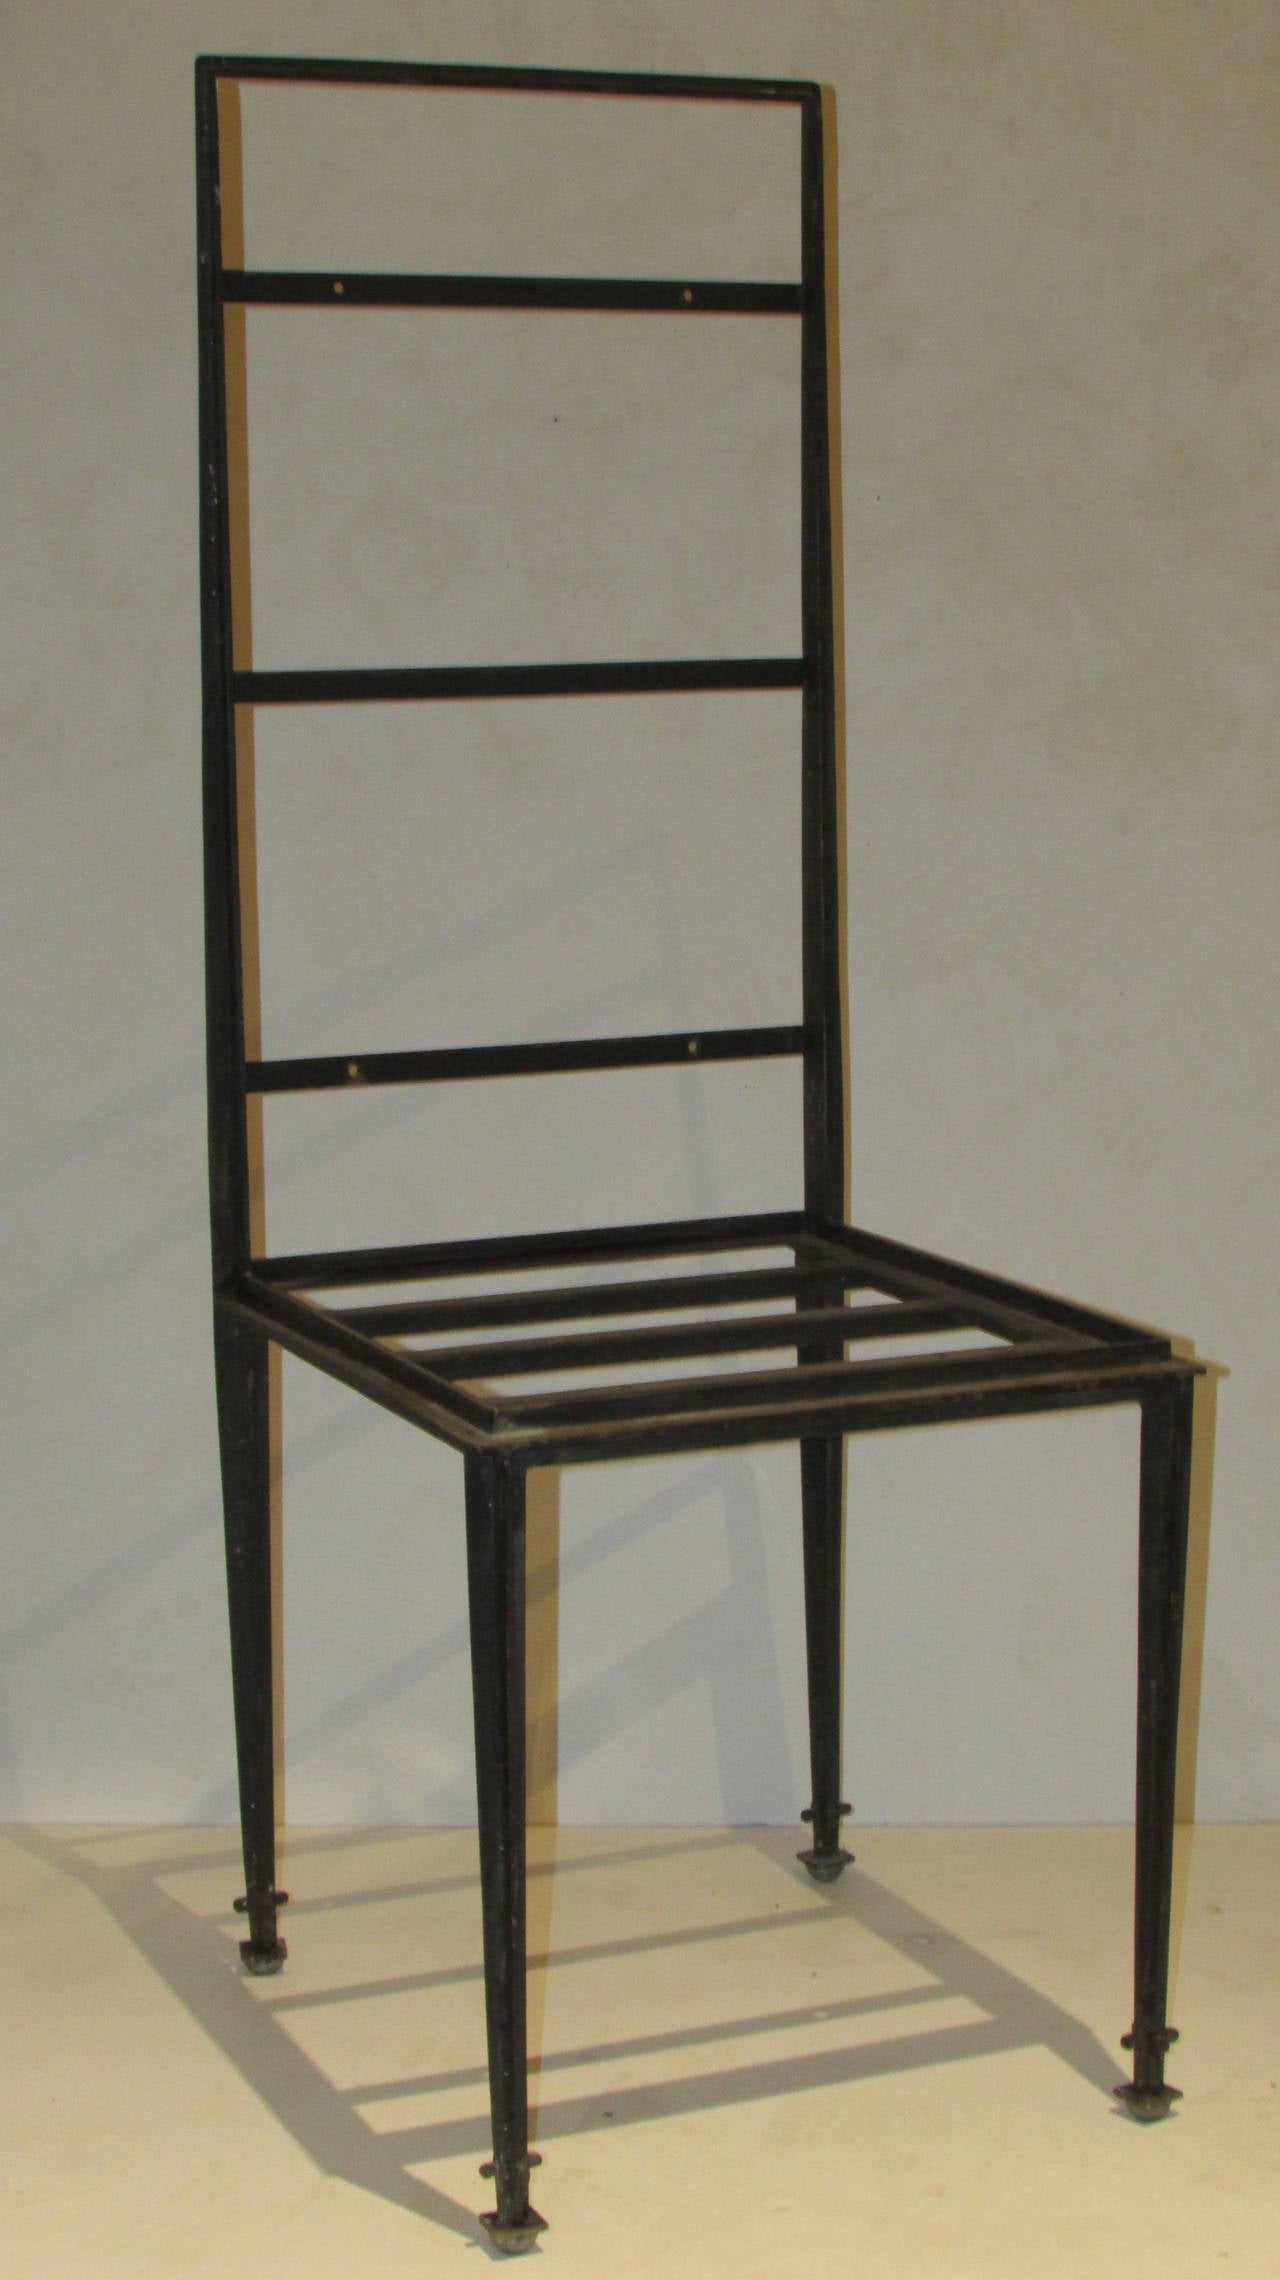  Unusual Modernist Tall Back Iron Chairs, 1940-1960 For Sale 4